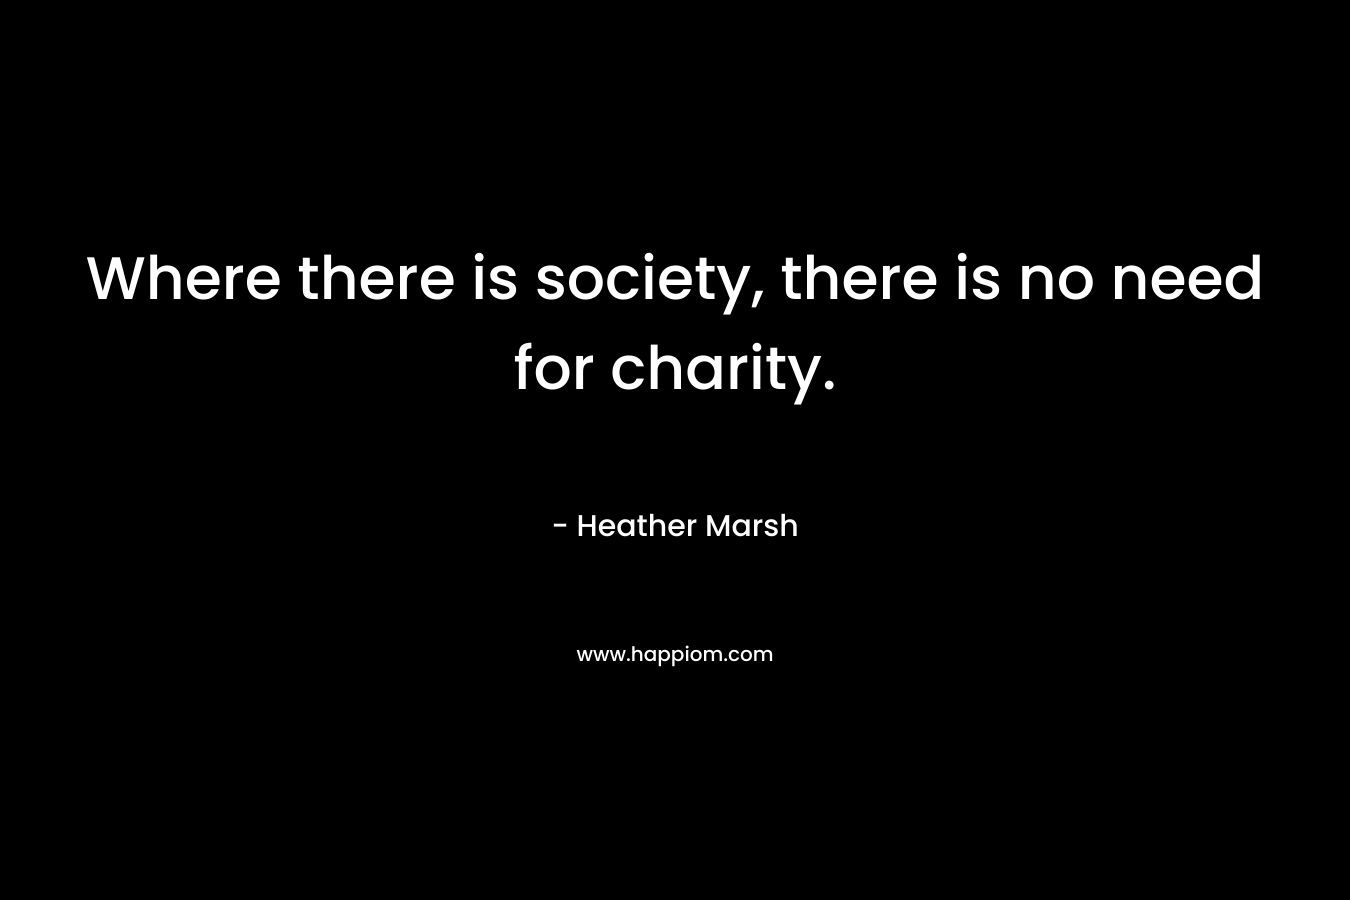 Where there is society, there is no need for charity.